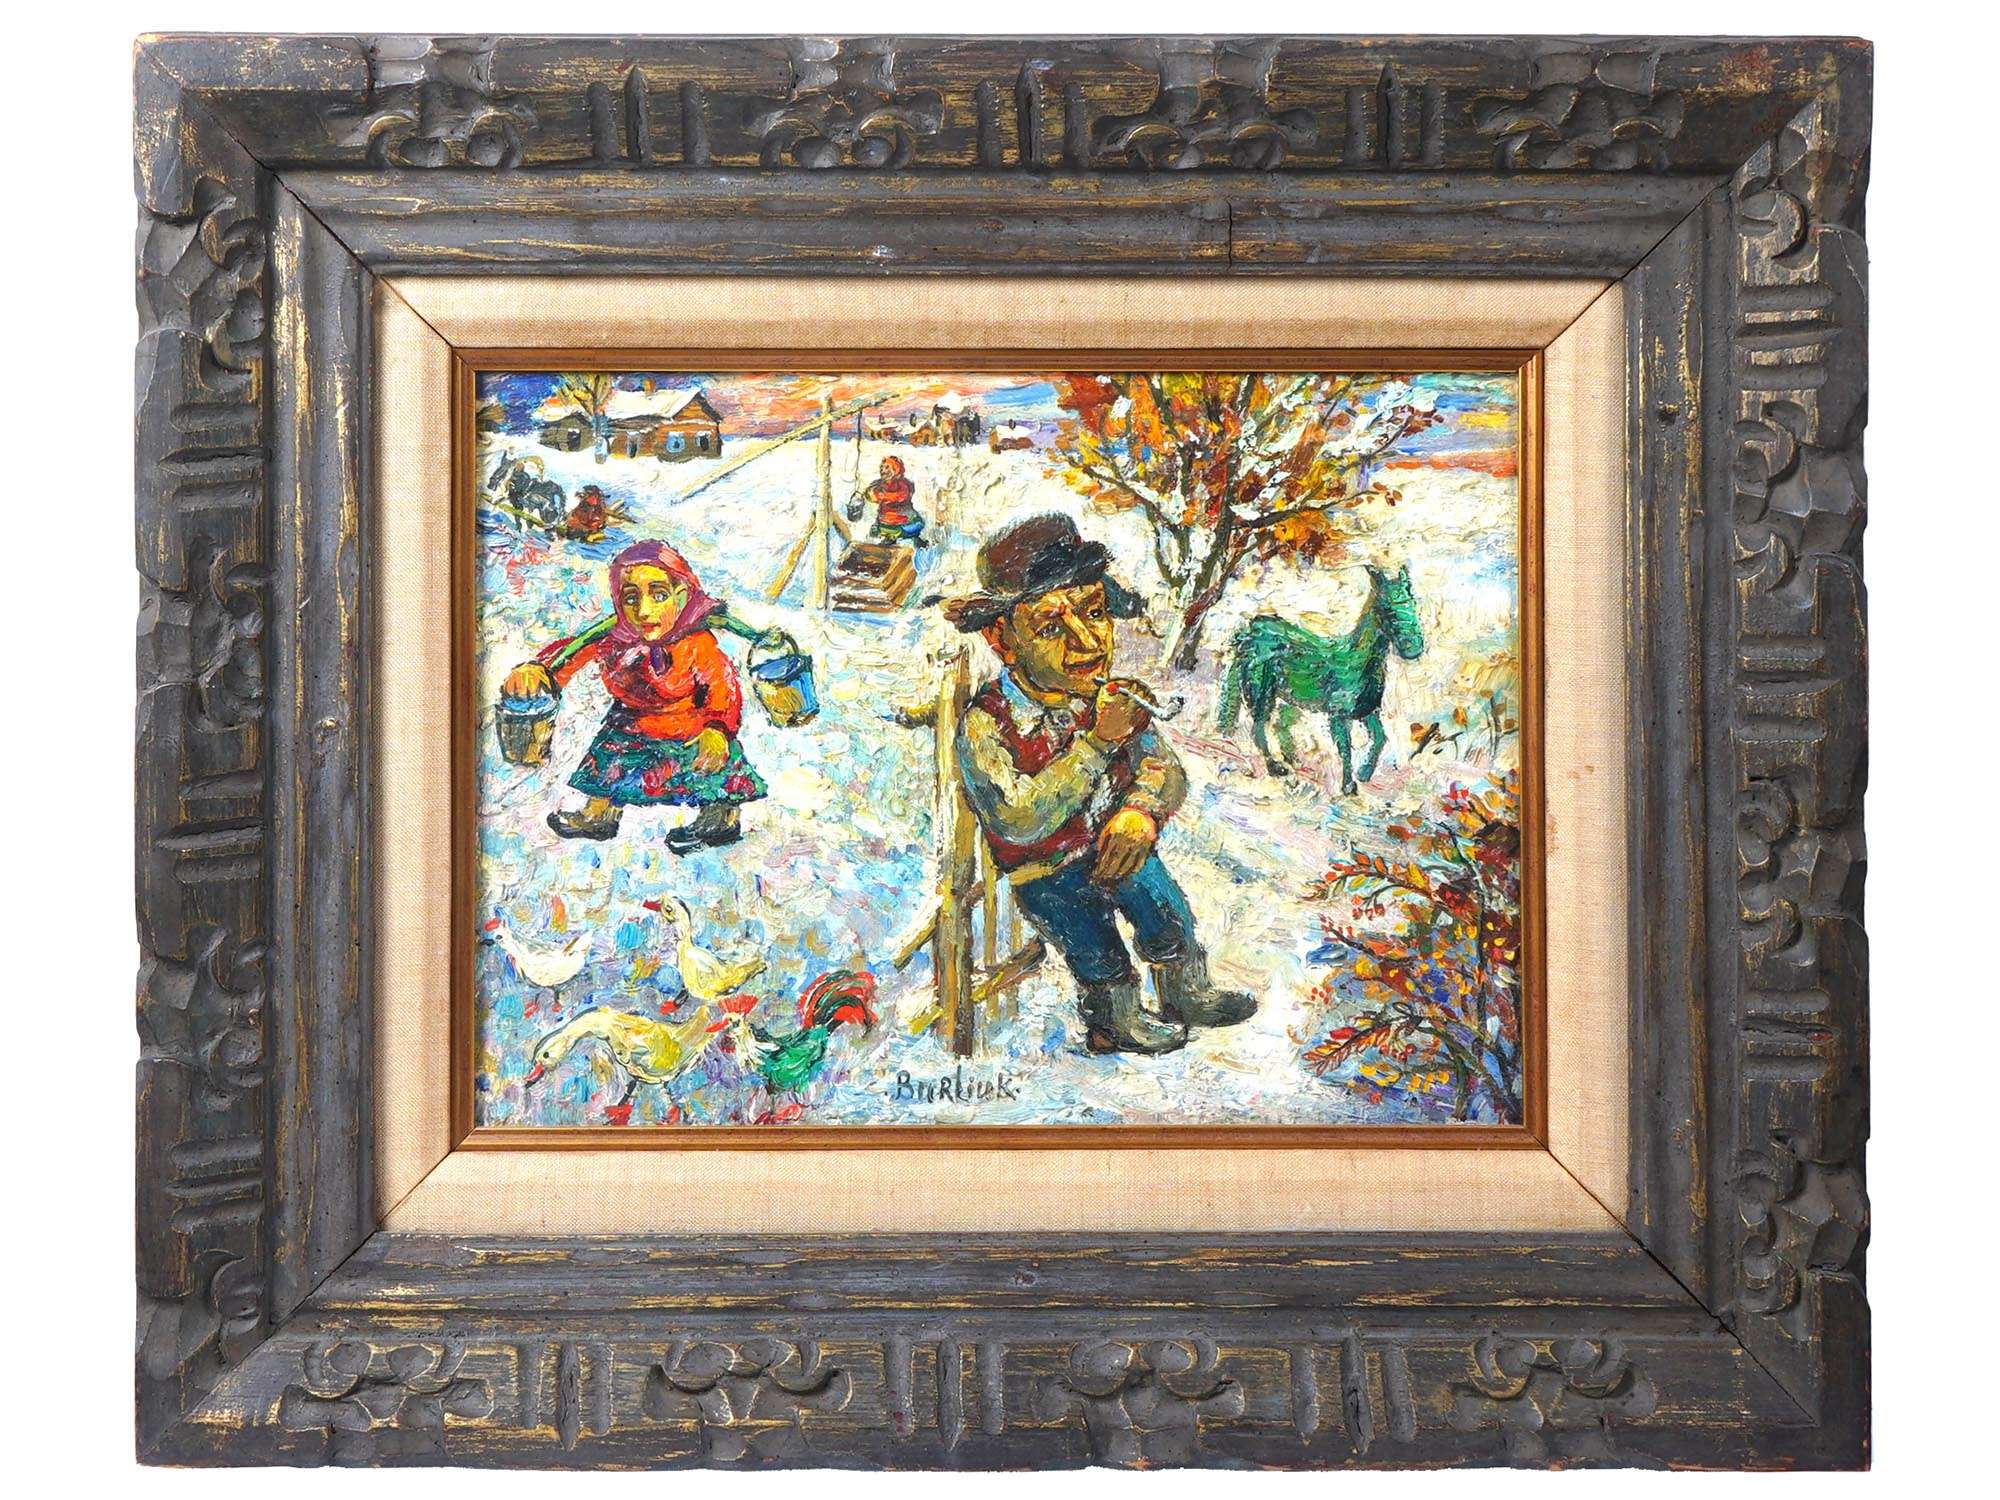 RUSSIAN OIL PAINTING ON CANVAS BY DAVID BURLIUK PIC-0